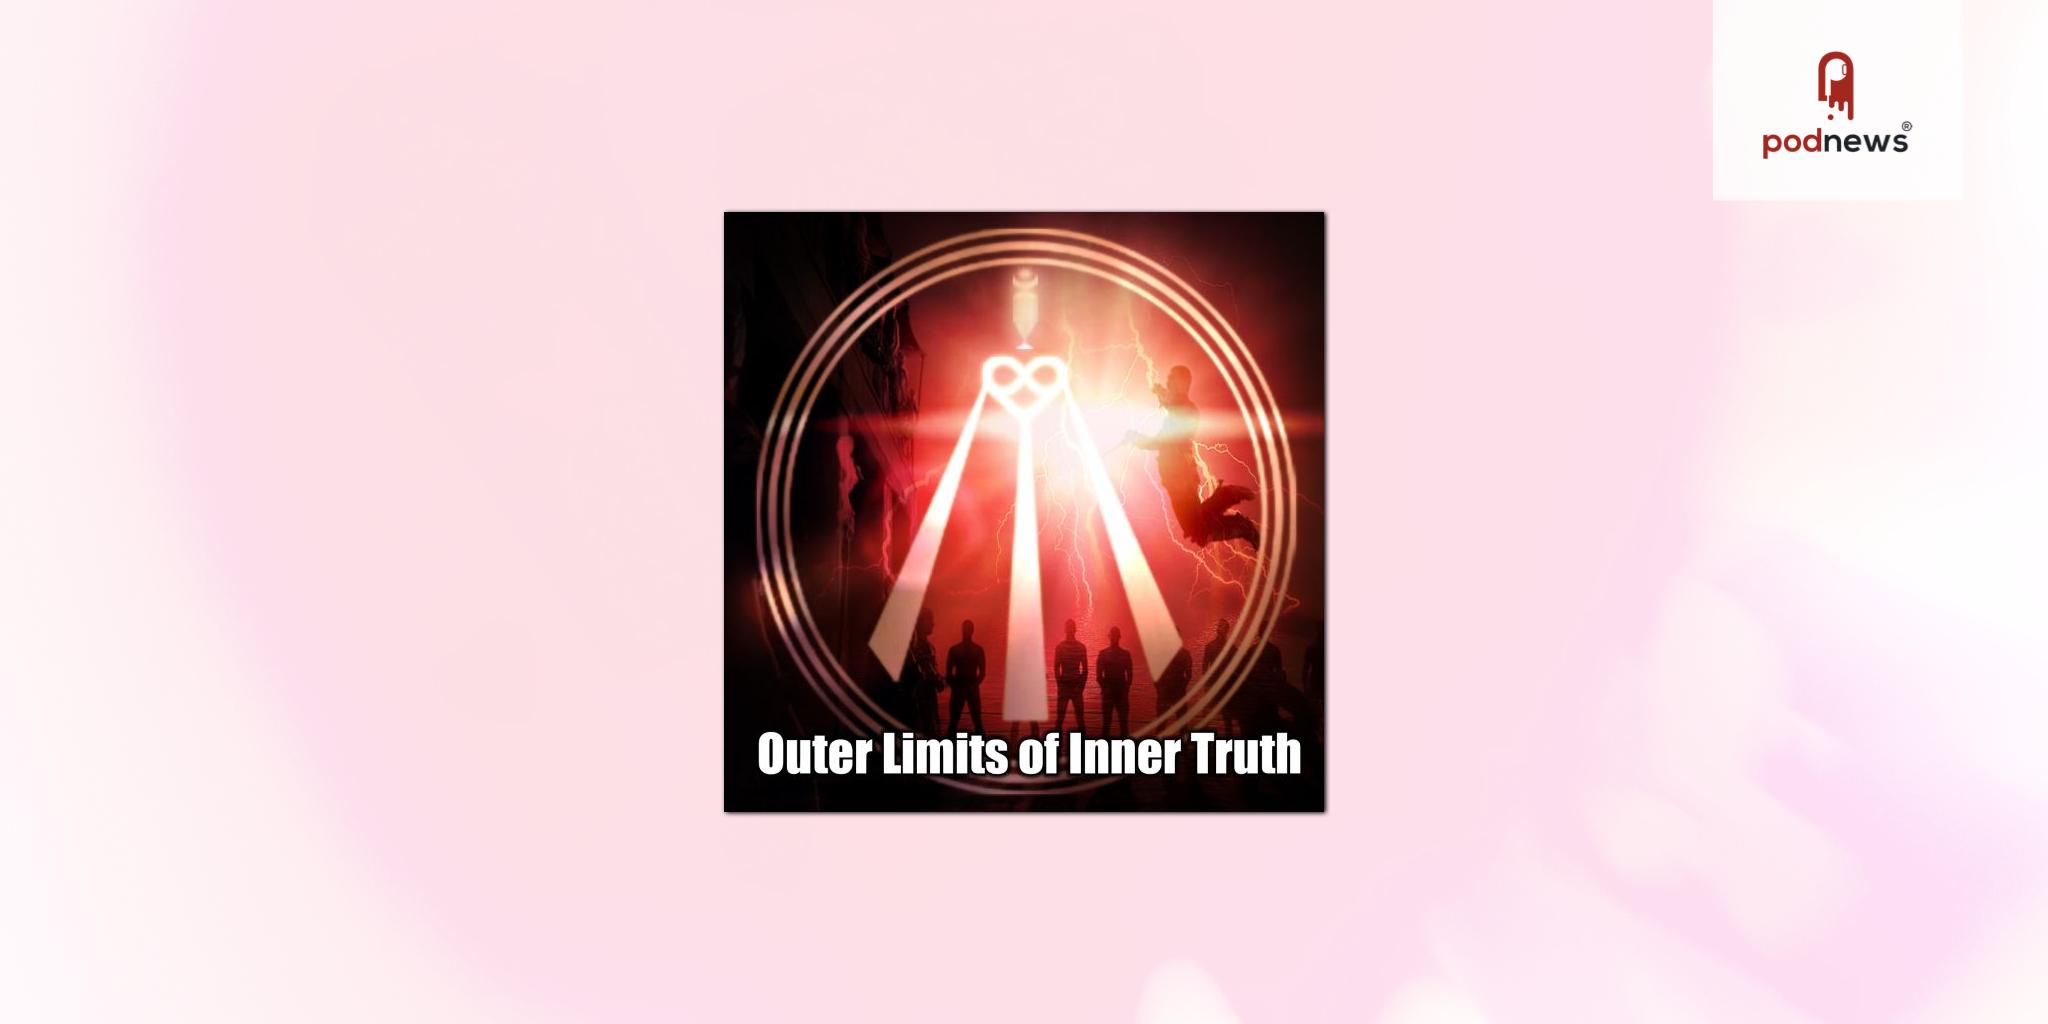 The Outer Limits of Inner Truth Podcast Commemorates Its 10-Year Anniversary